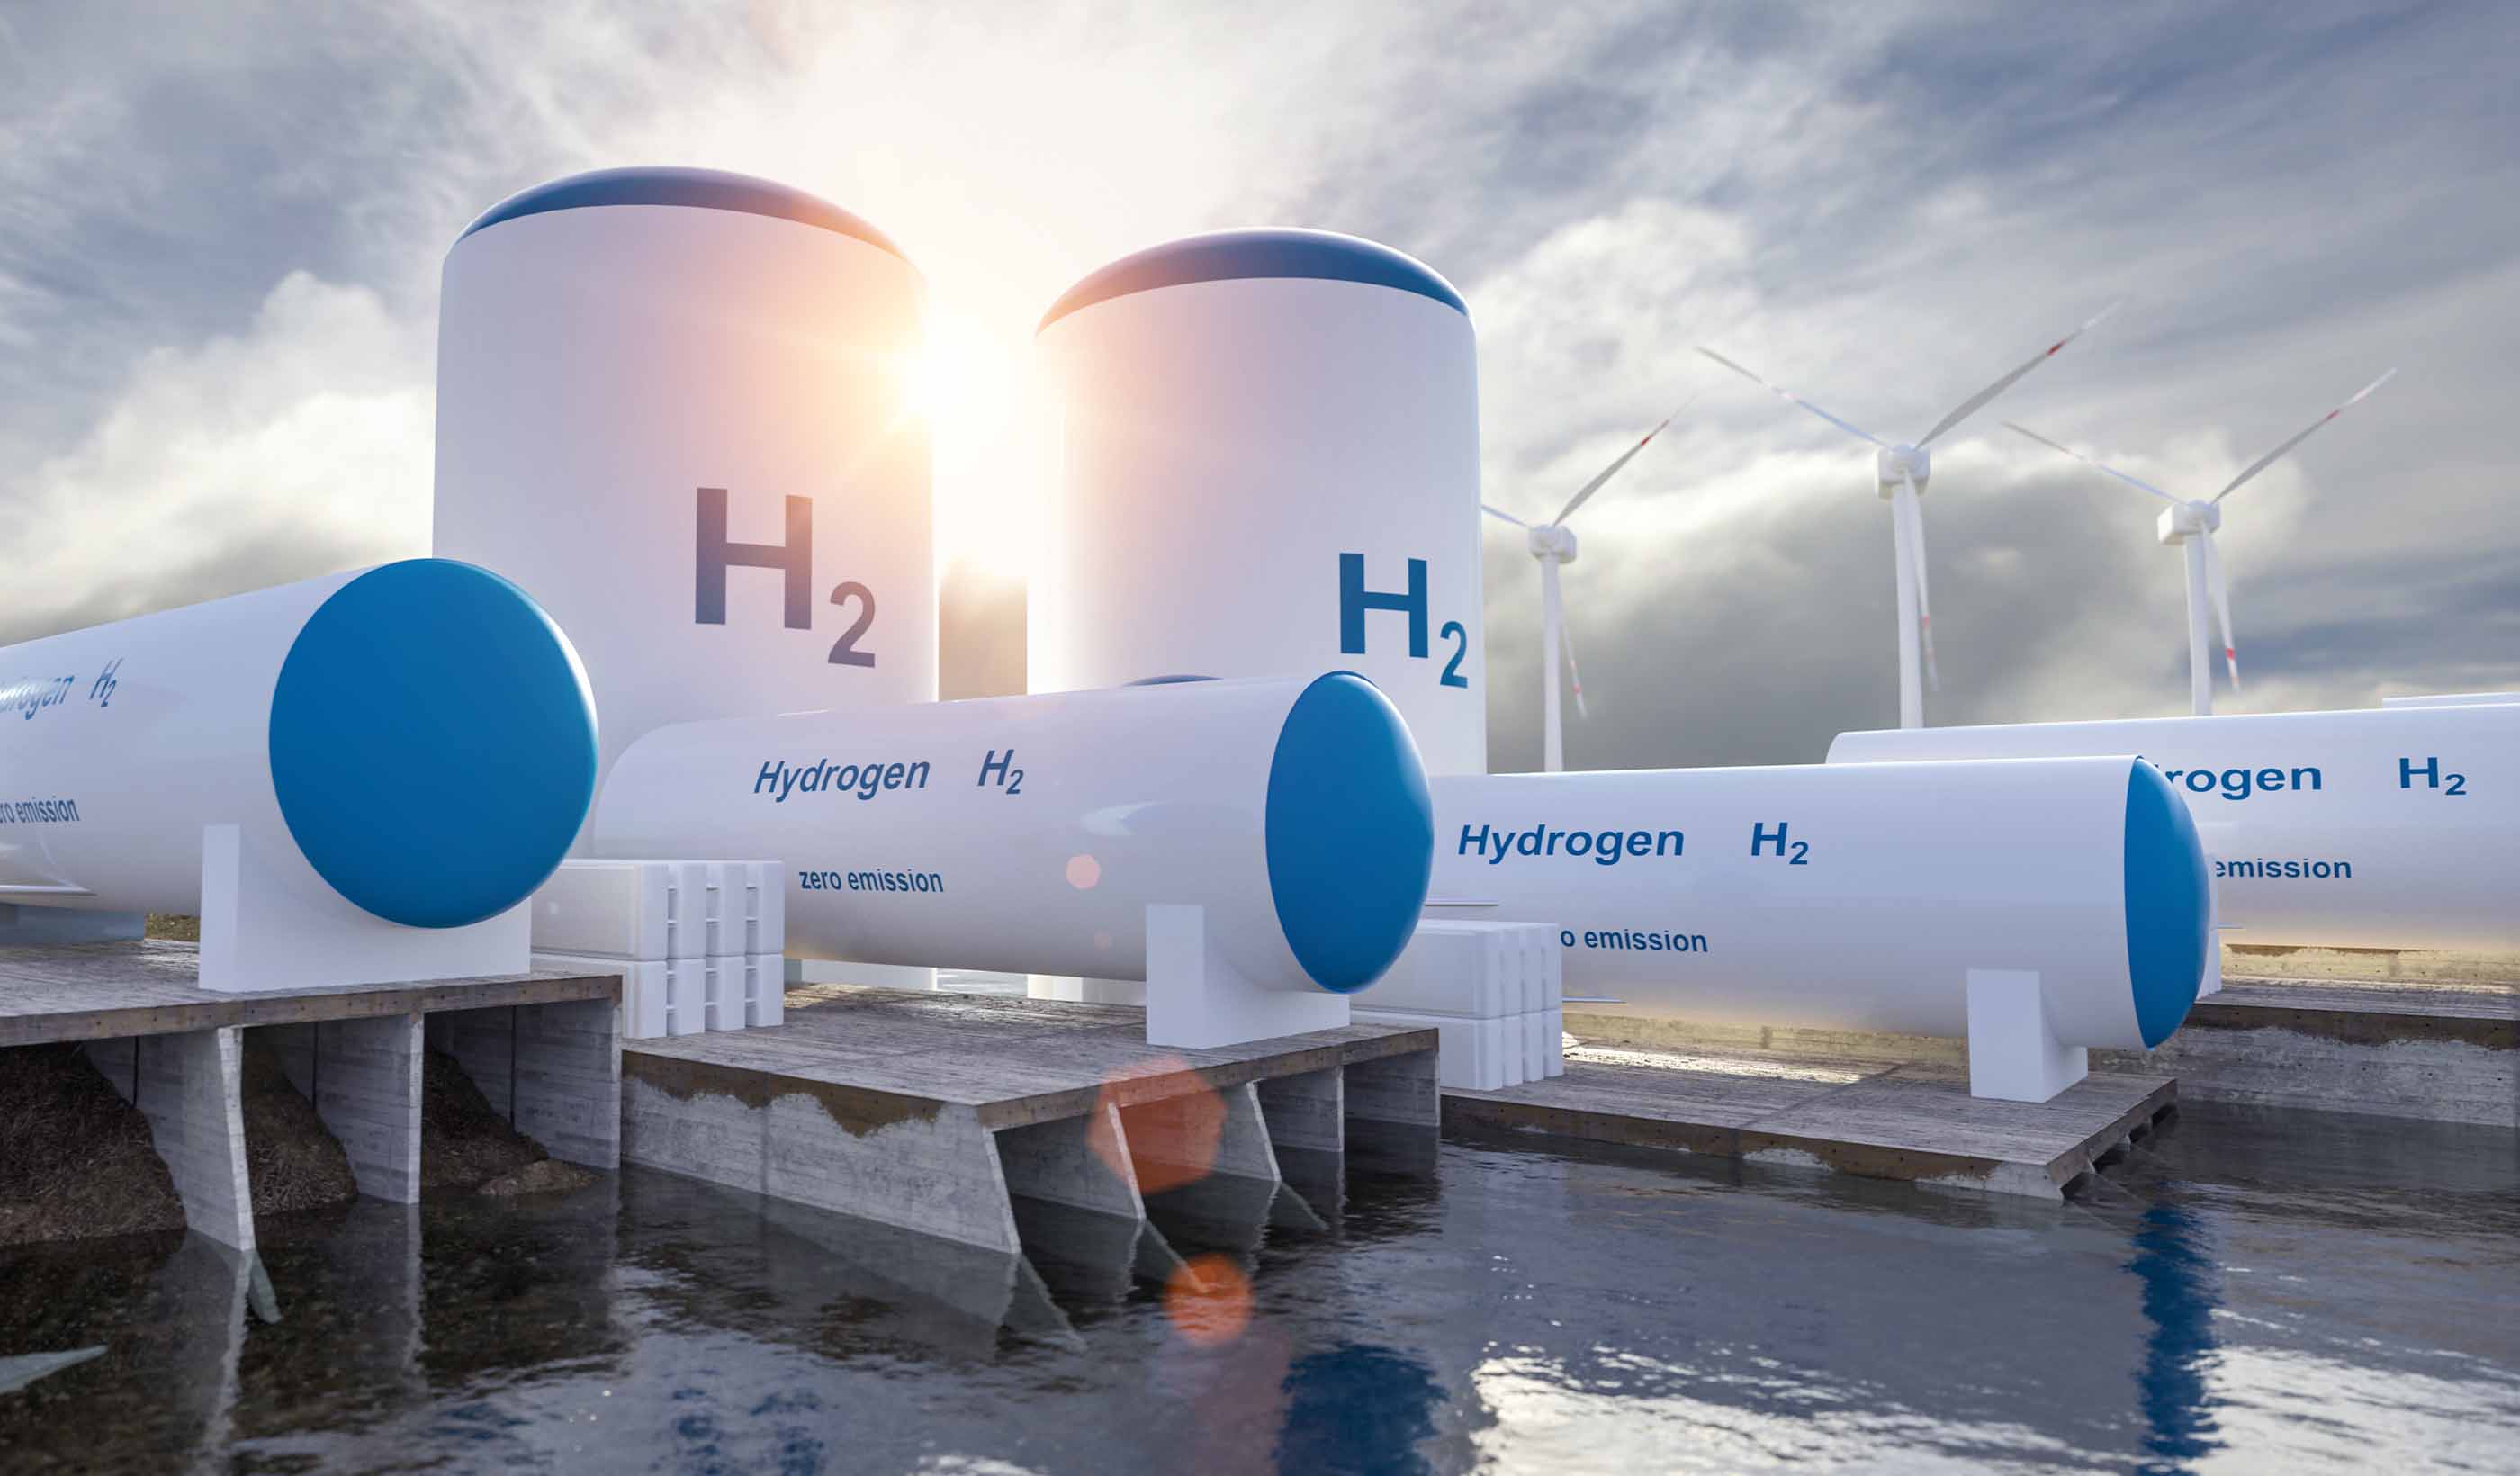 The Geography of Hydrogen is the catalyst to economic stimulus and adaptation to climate change